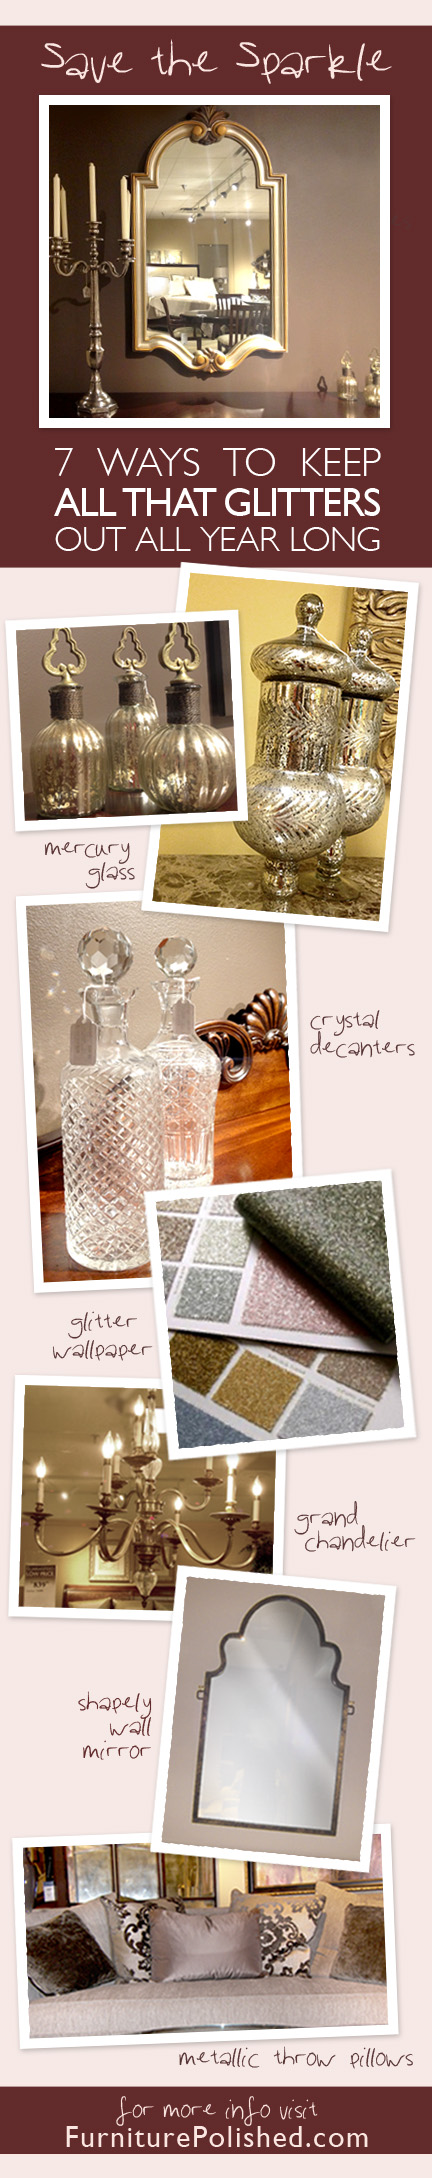 7 ways to keep "all that glitters" out all year round